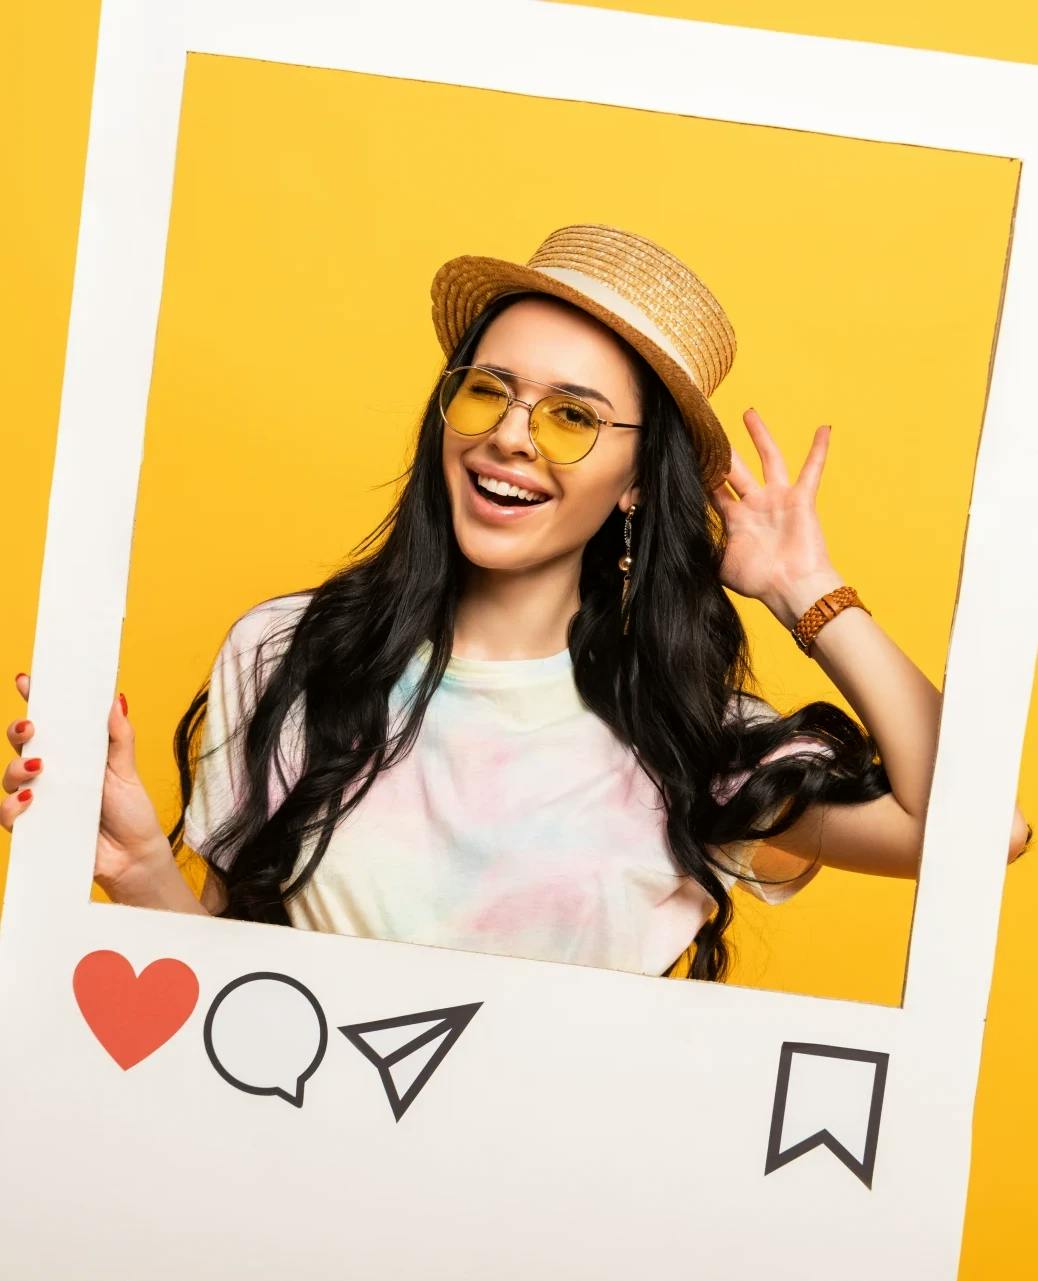 A happy, wealthy young woman ready to invest smiles through a cardboard Instagram post, ready to convert for a tearsheetads.com ad campaign.